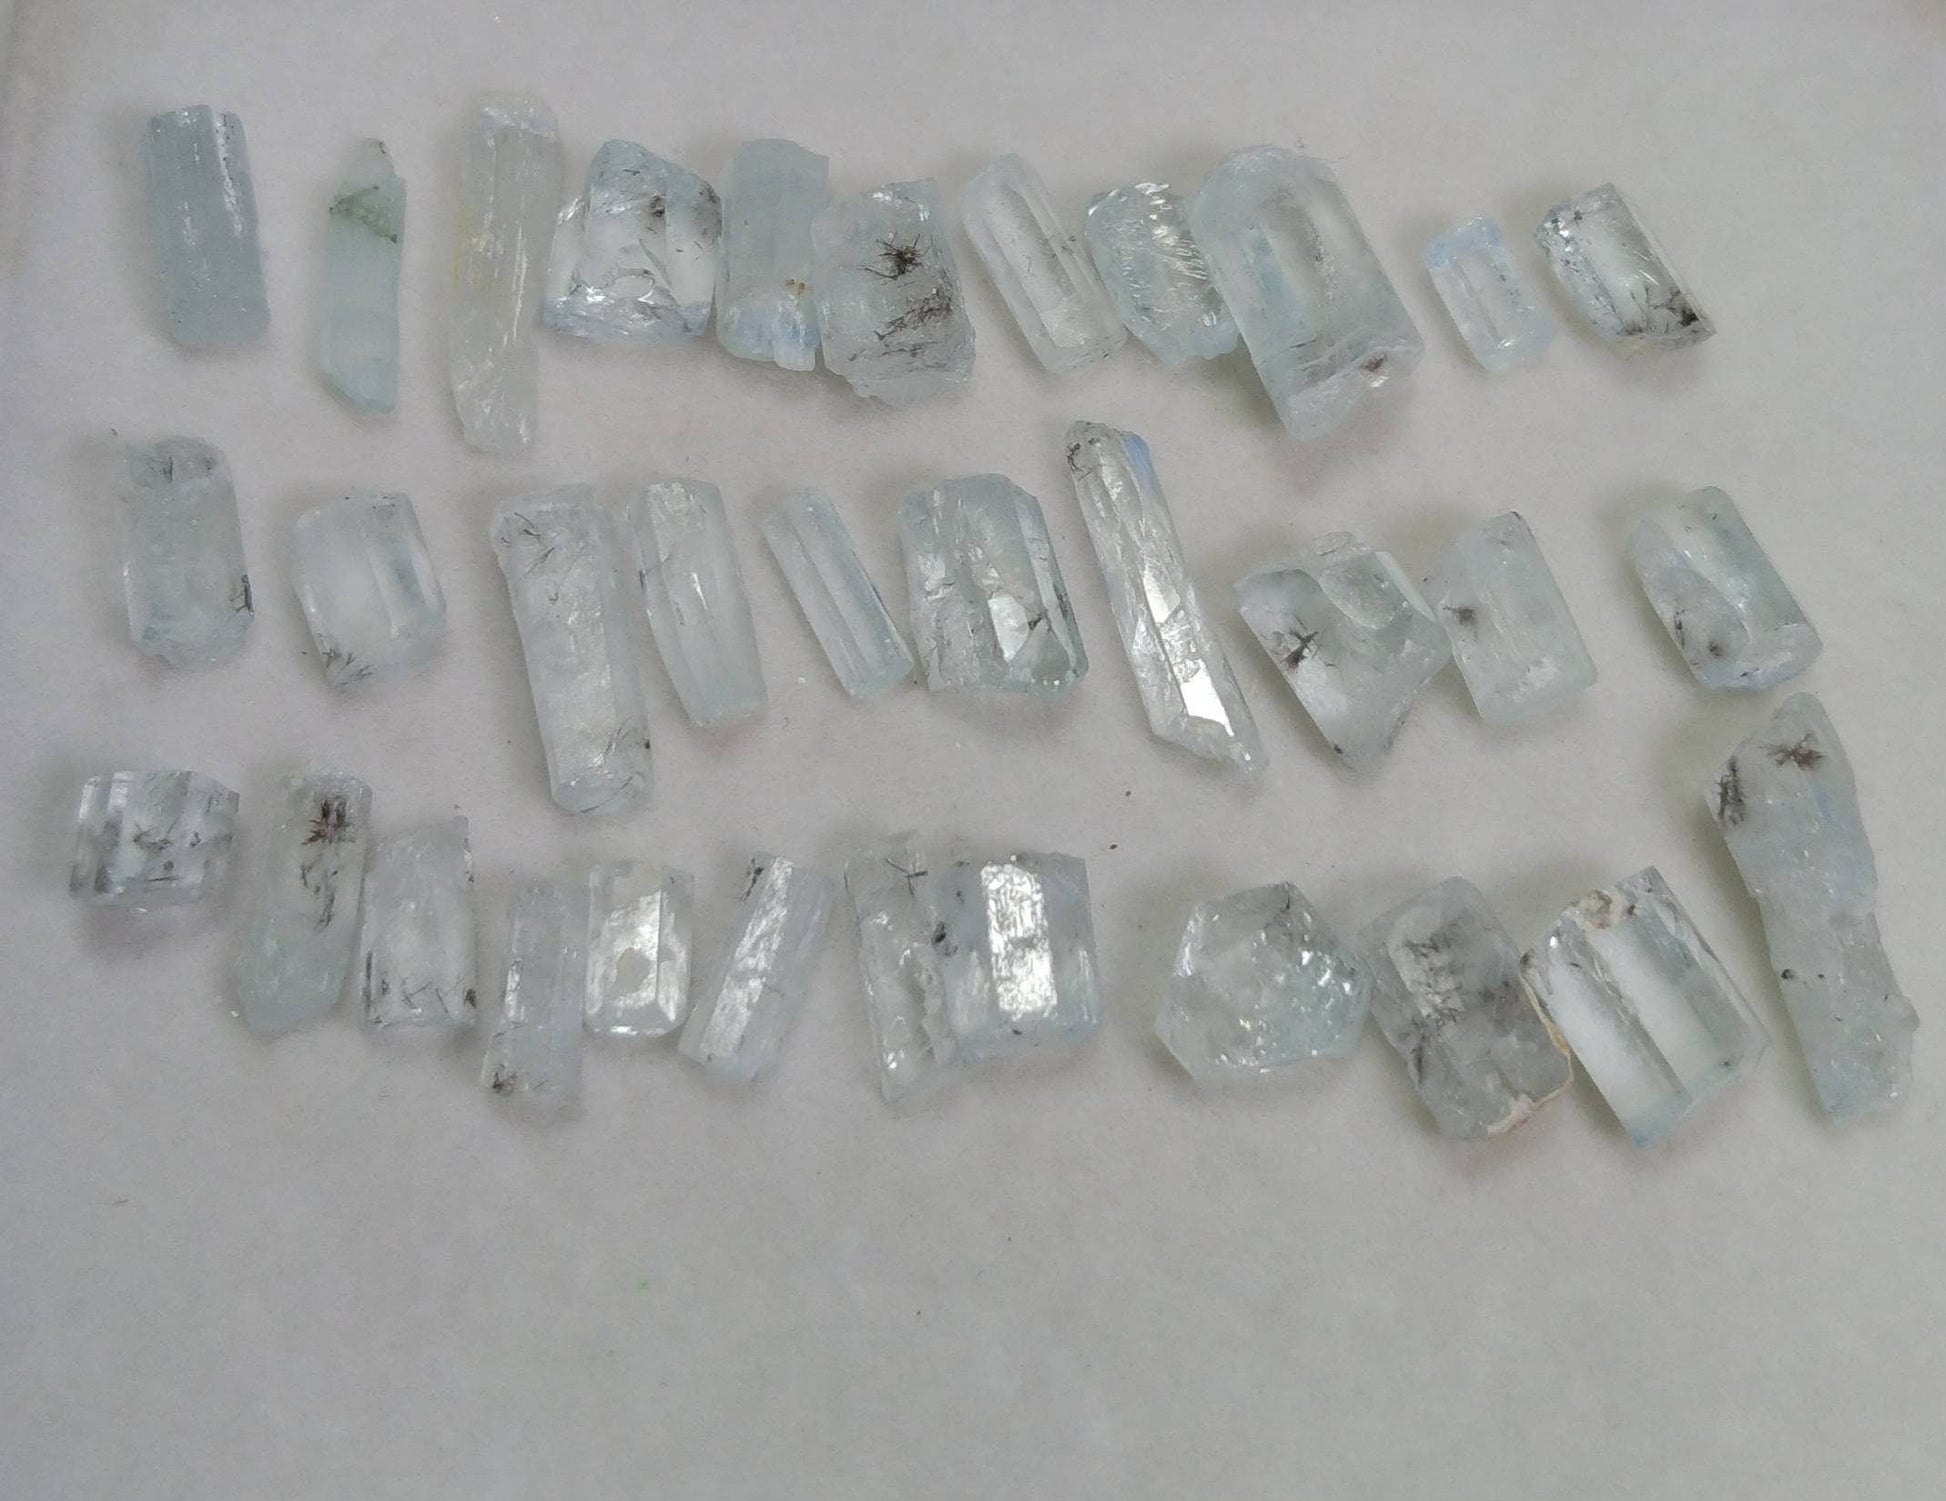 ARSAA GEMS AND MINERALSNatural fine quality beautiful 10.6 grams light blue small lot of aquamarine crystals - Premium  from ARSAA GEMS AND MINERALS - Just $50.00! Shop now at ARSAA GEMS AND MINERALS